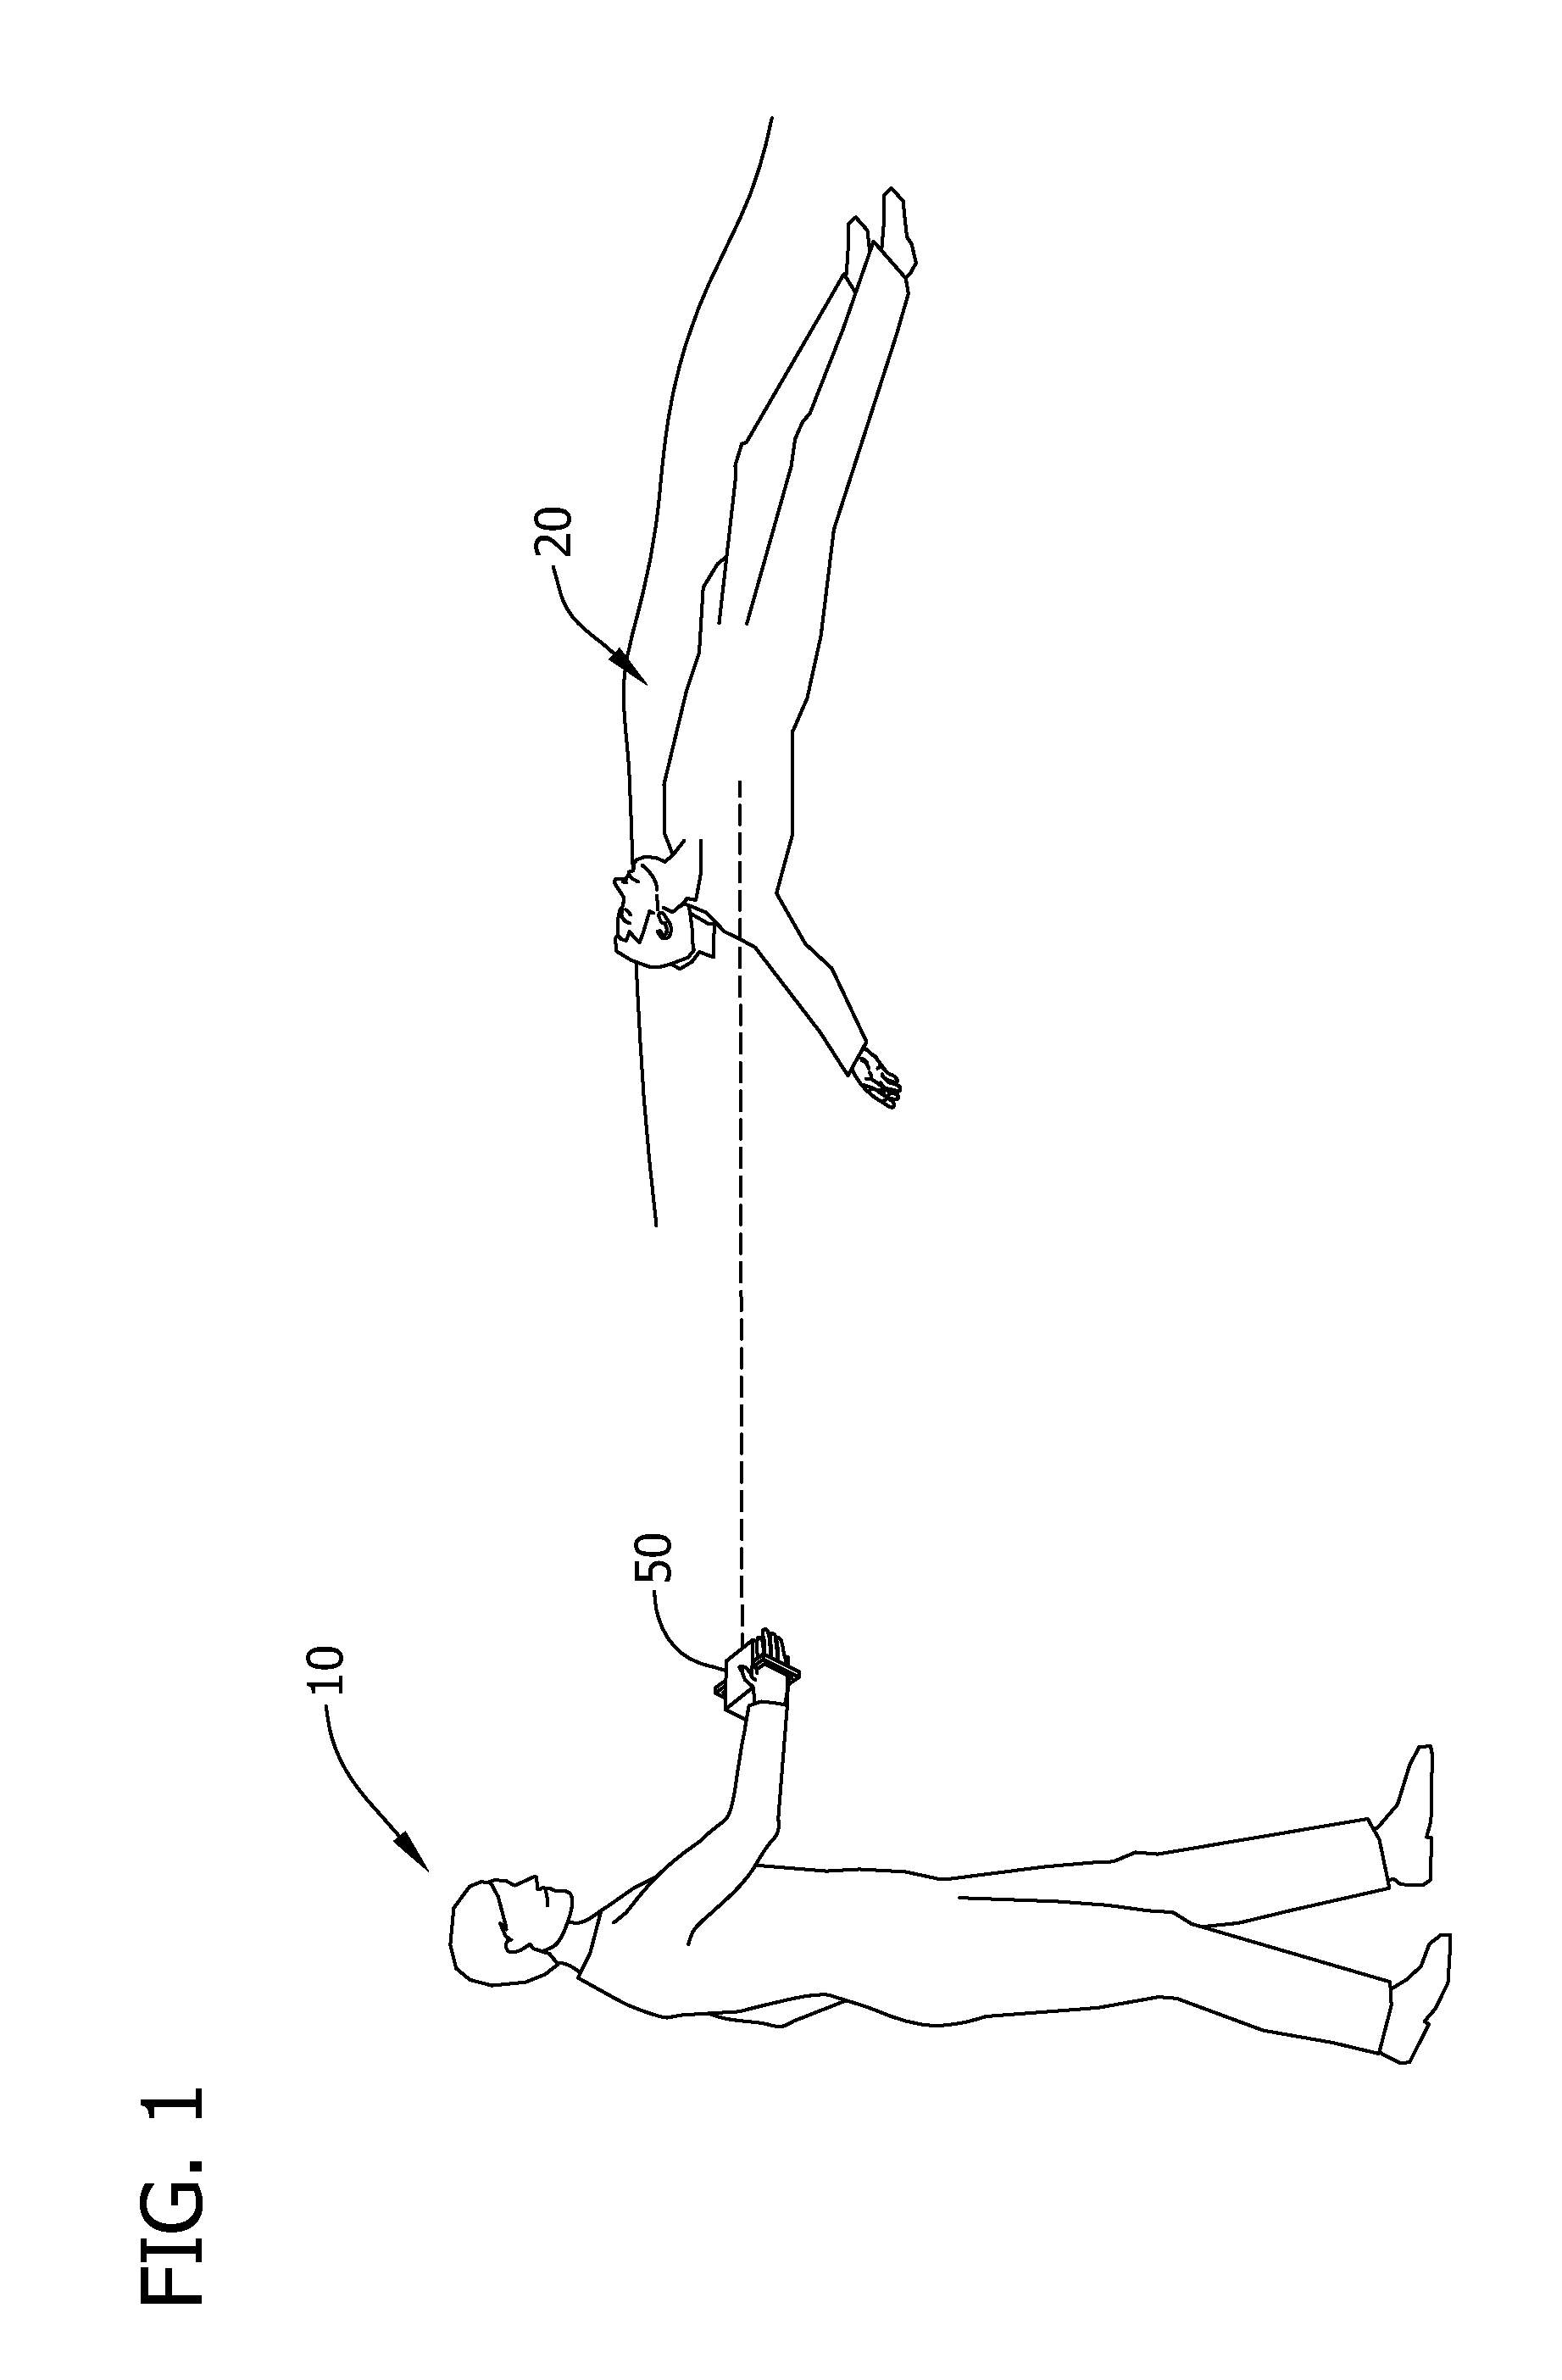 Systems and methods for non-contact biometric sensing